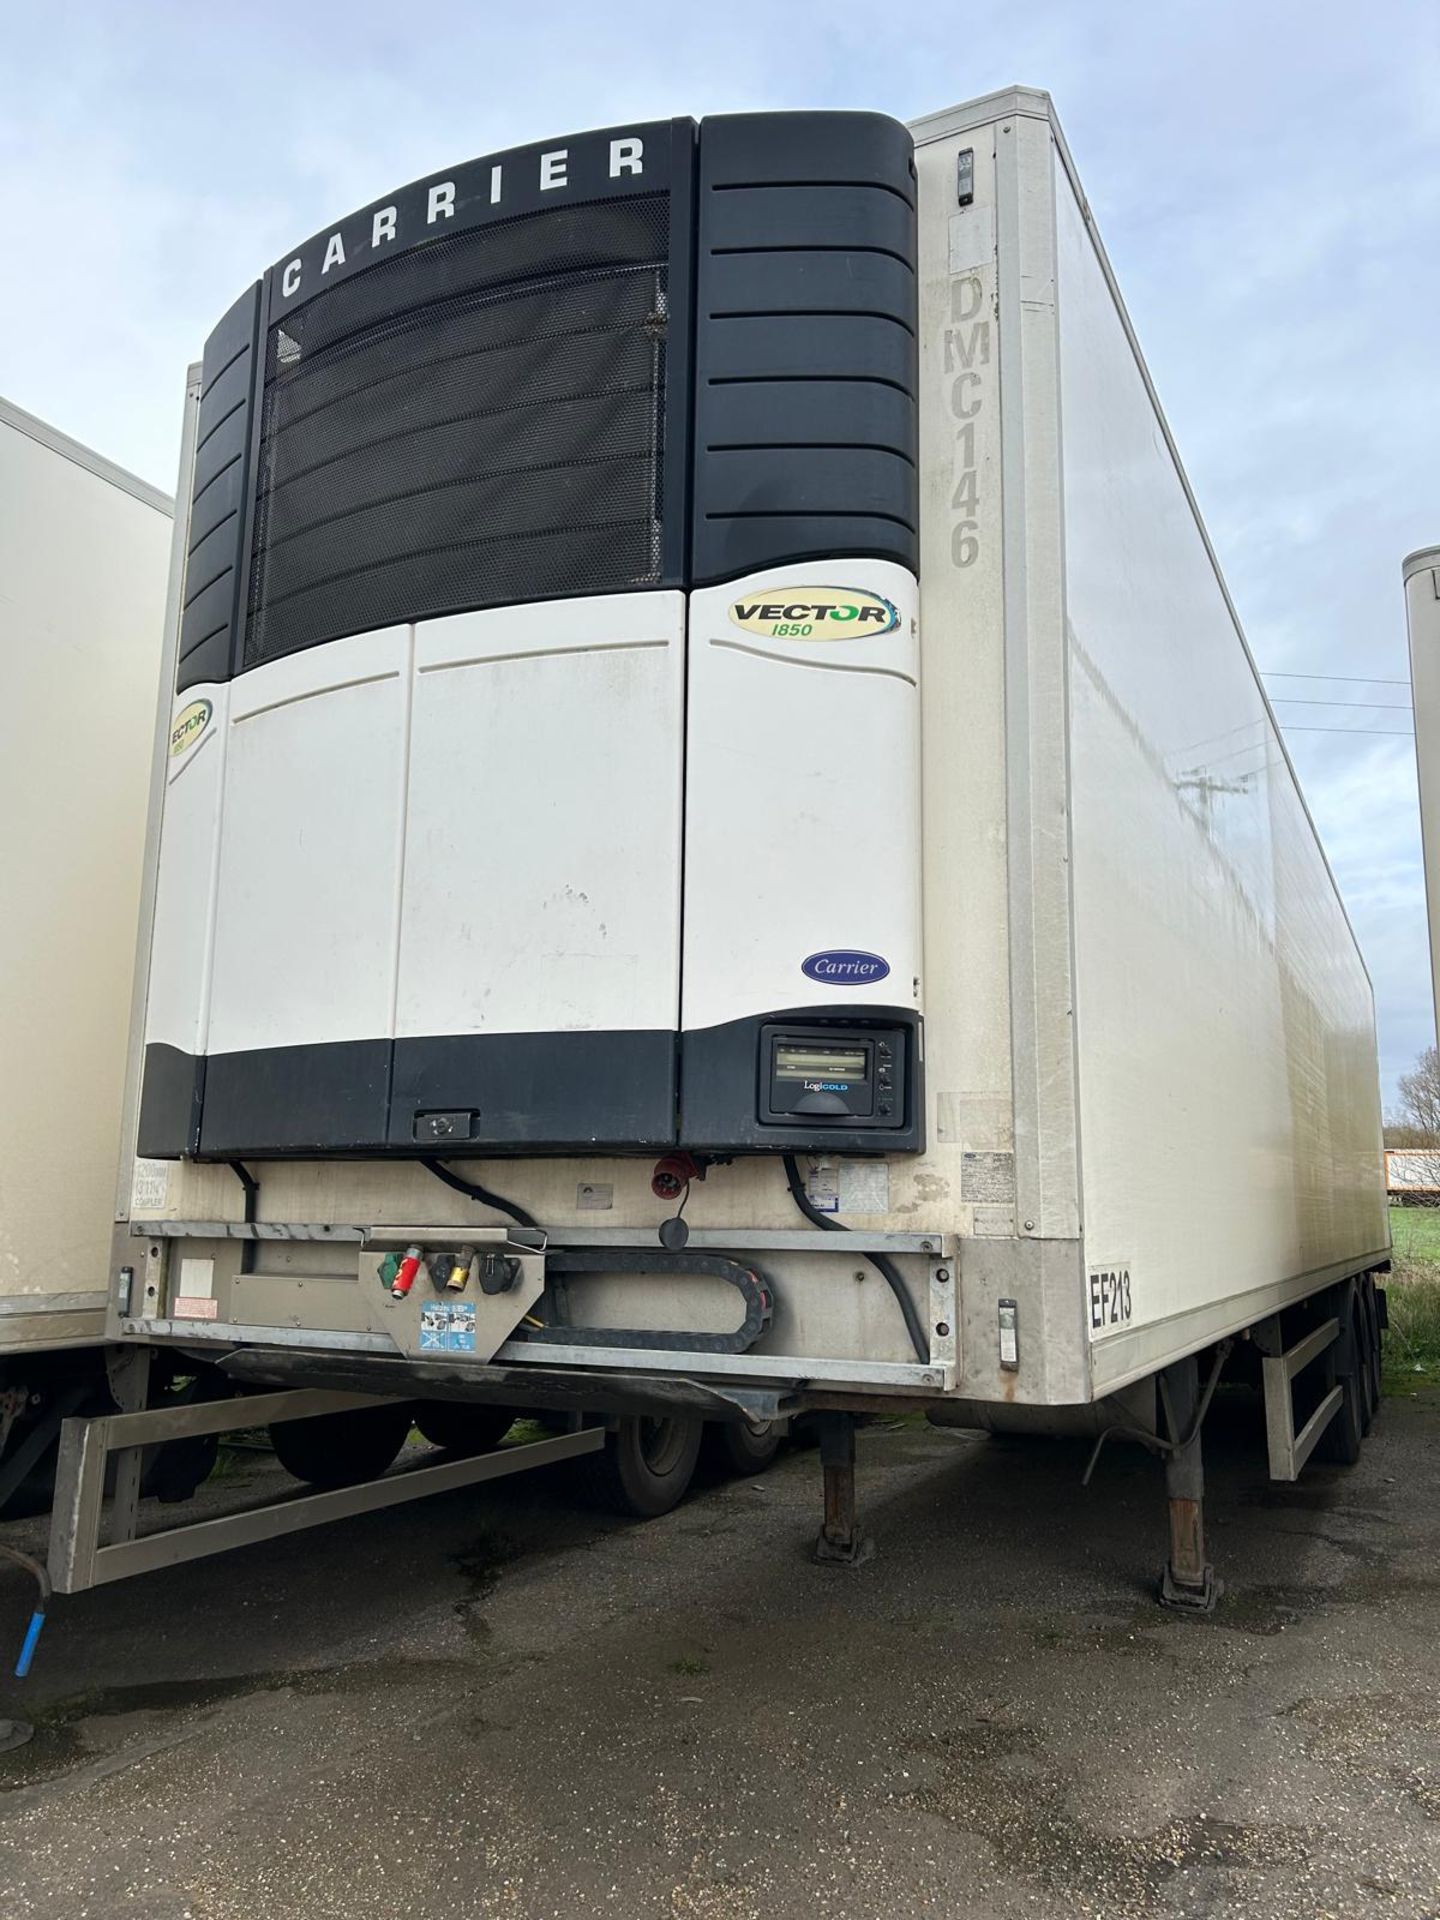 EF213 – 2010 Montracon 13.6m Refrigerated Trailer